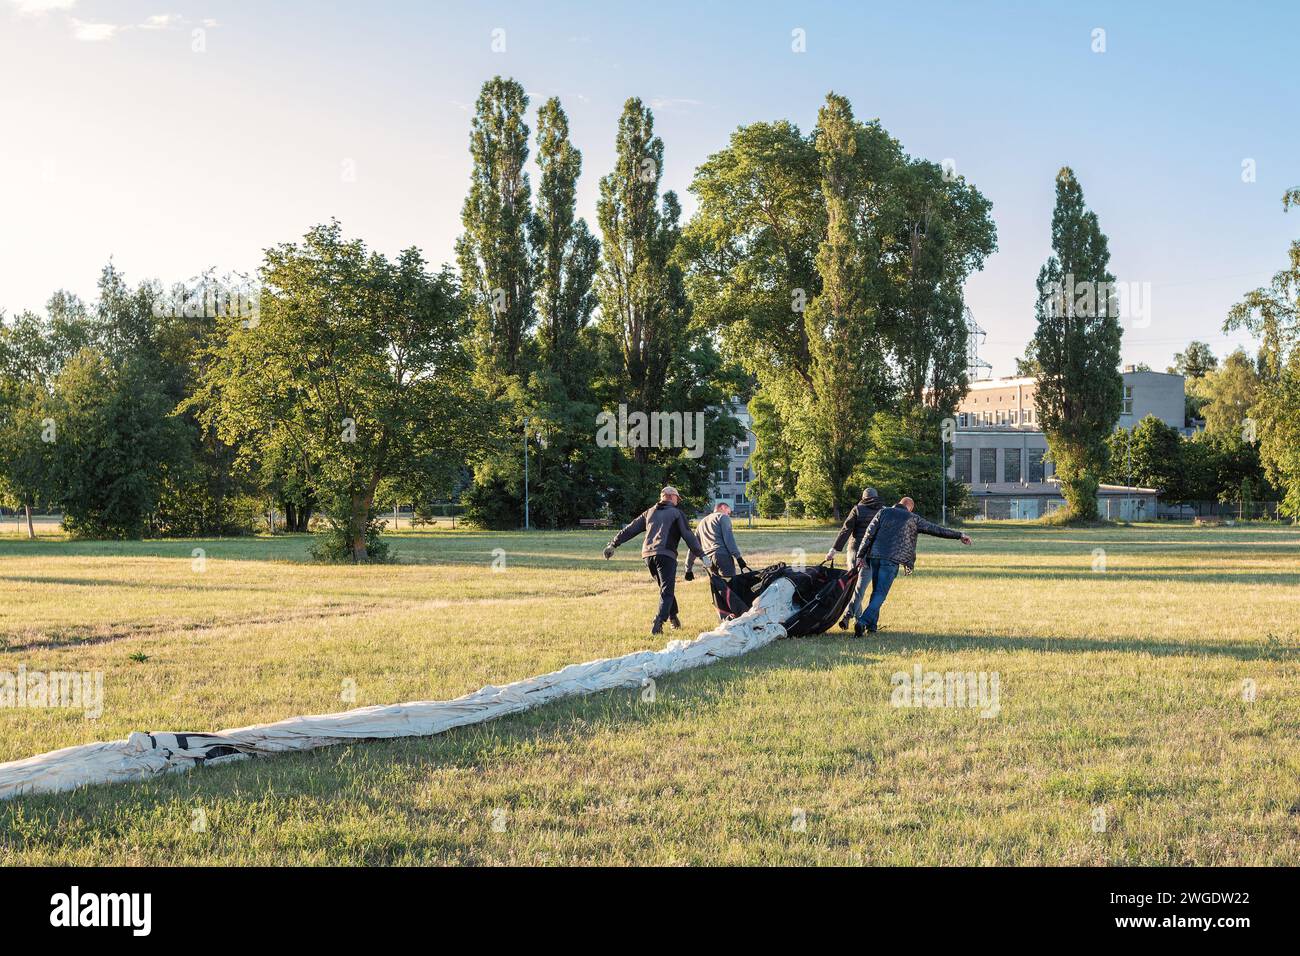 Four strong men unpack the fabric of a hot air balloon while stretching it out in a meadow. Stock Photo